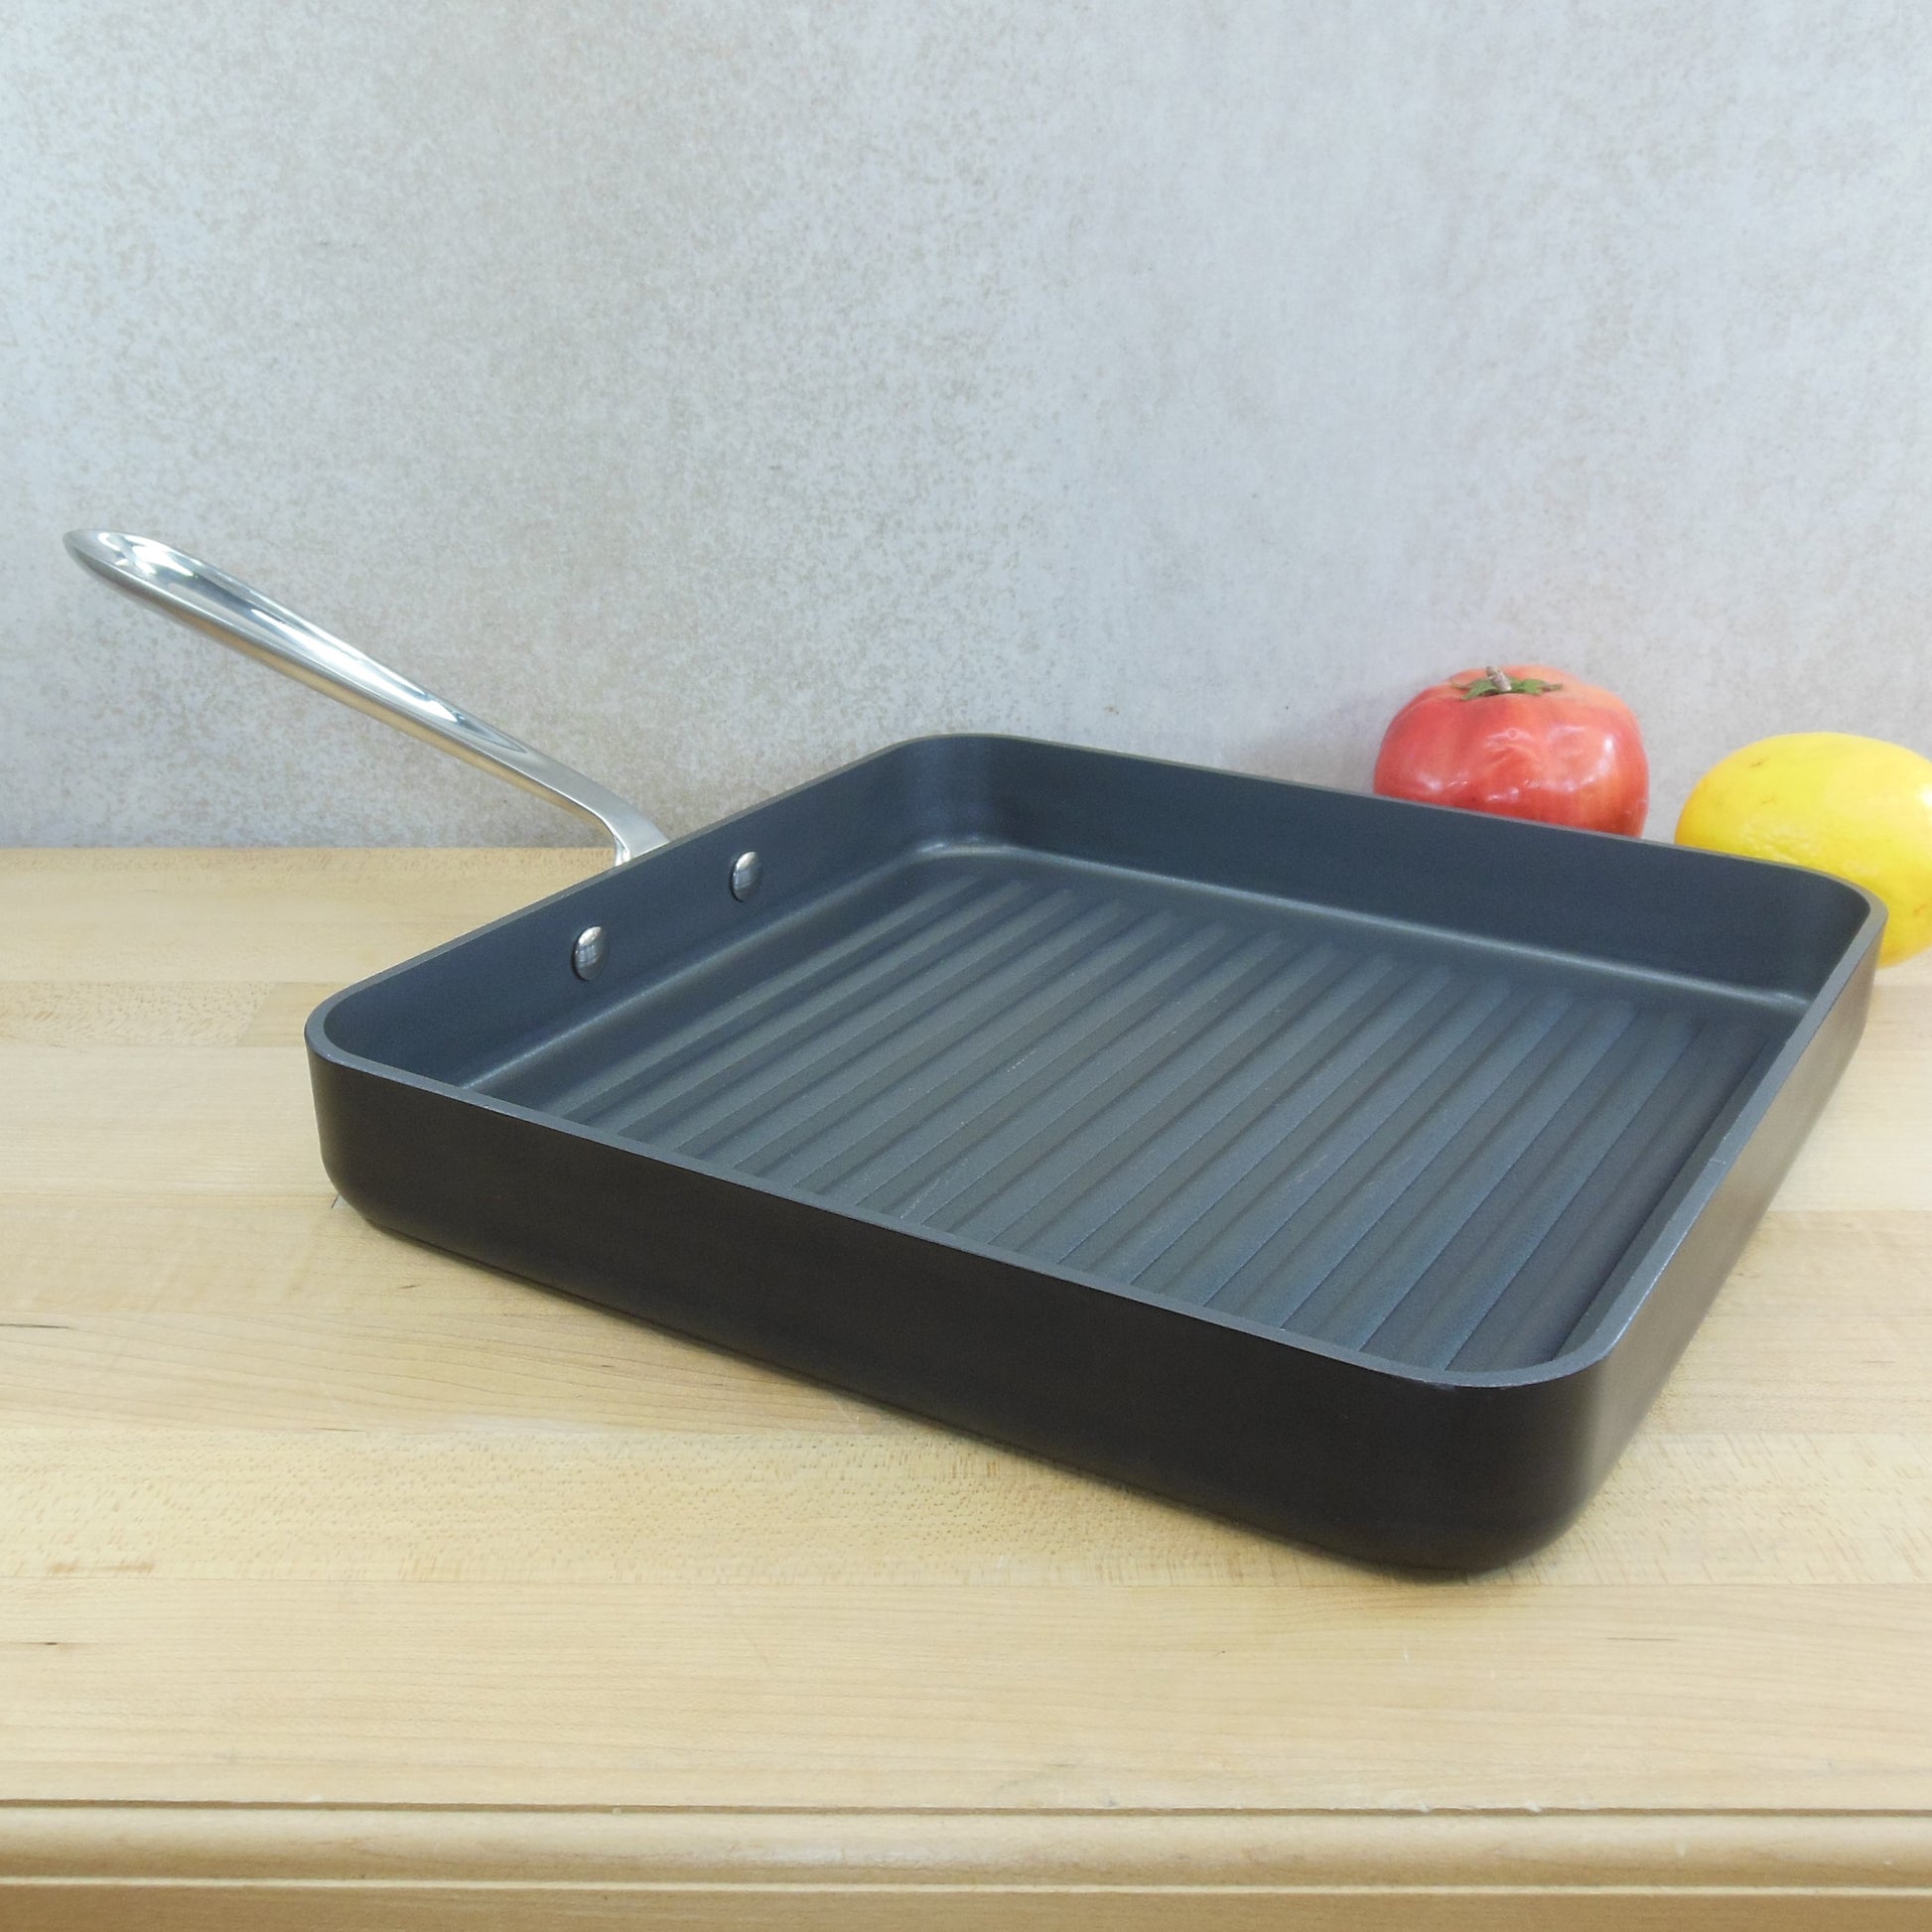 All-Clad Hard-Anodized Non-Stick 11 Square Griddle + Reviews